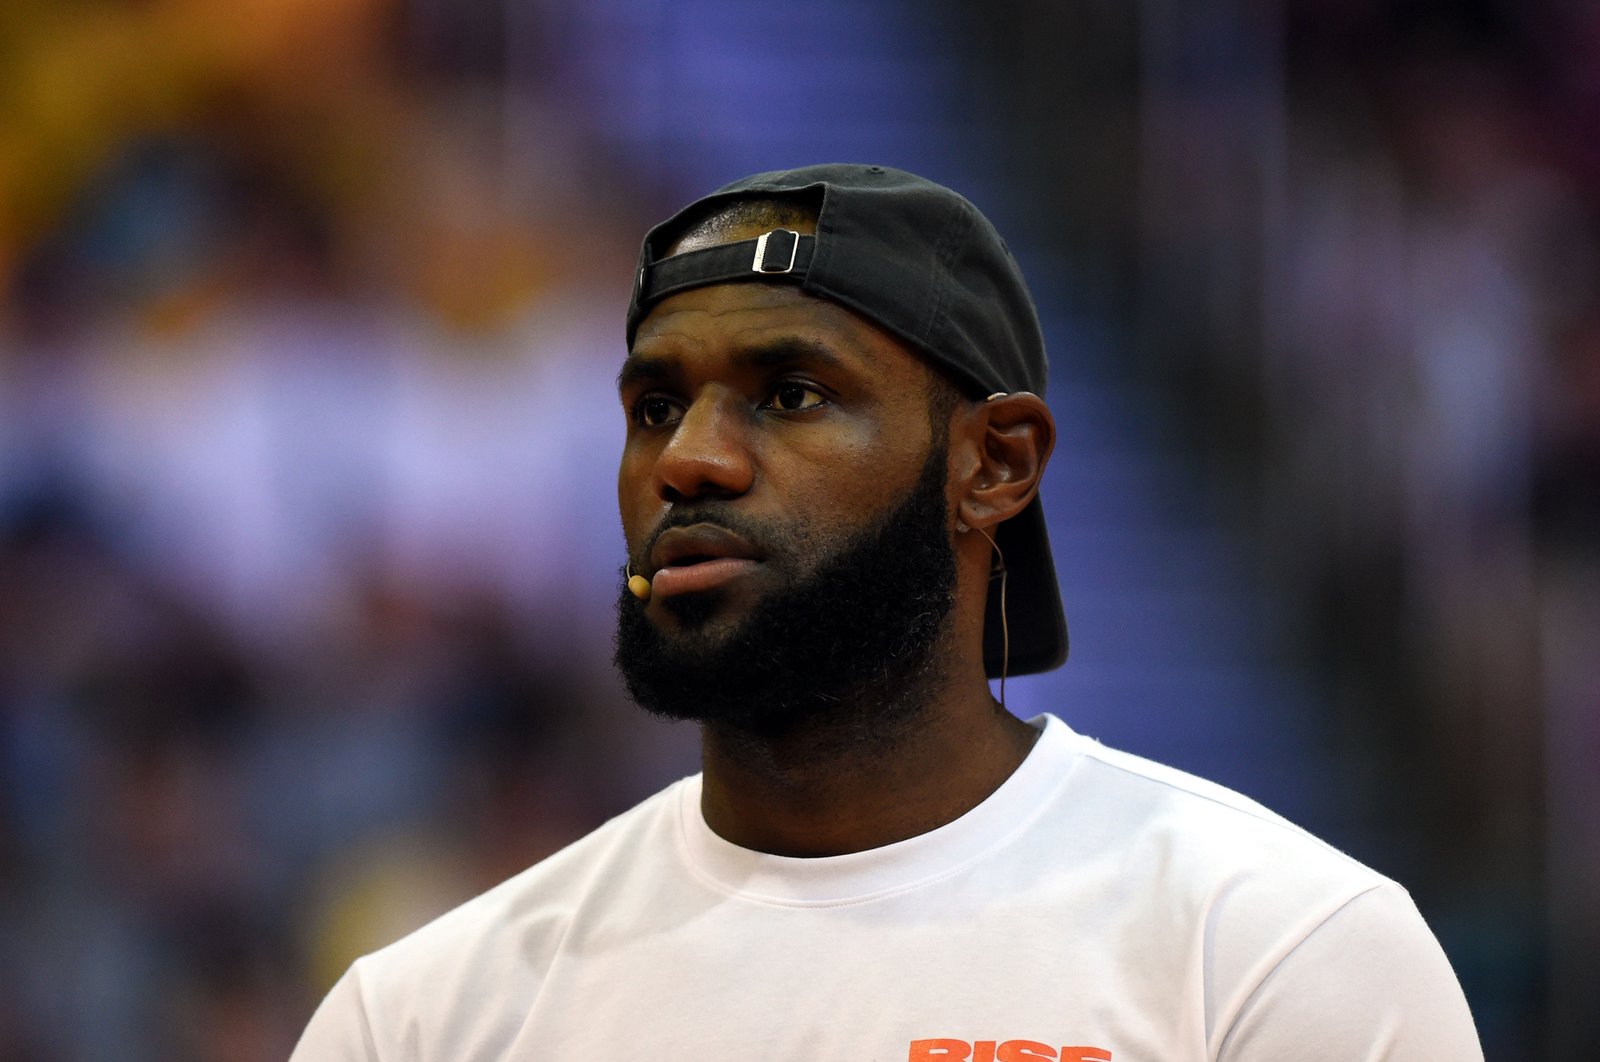 NBA star LeBron James of Cleveland Cavaliers attends a fan meeting event in Hong Kong, China, 5 September 2017.